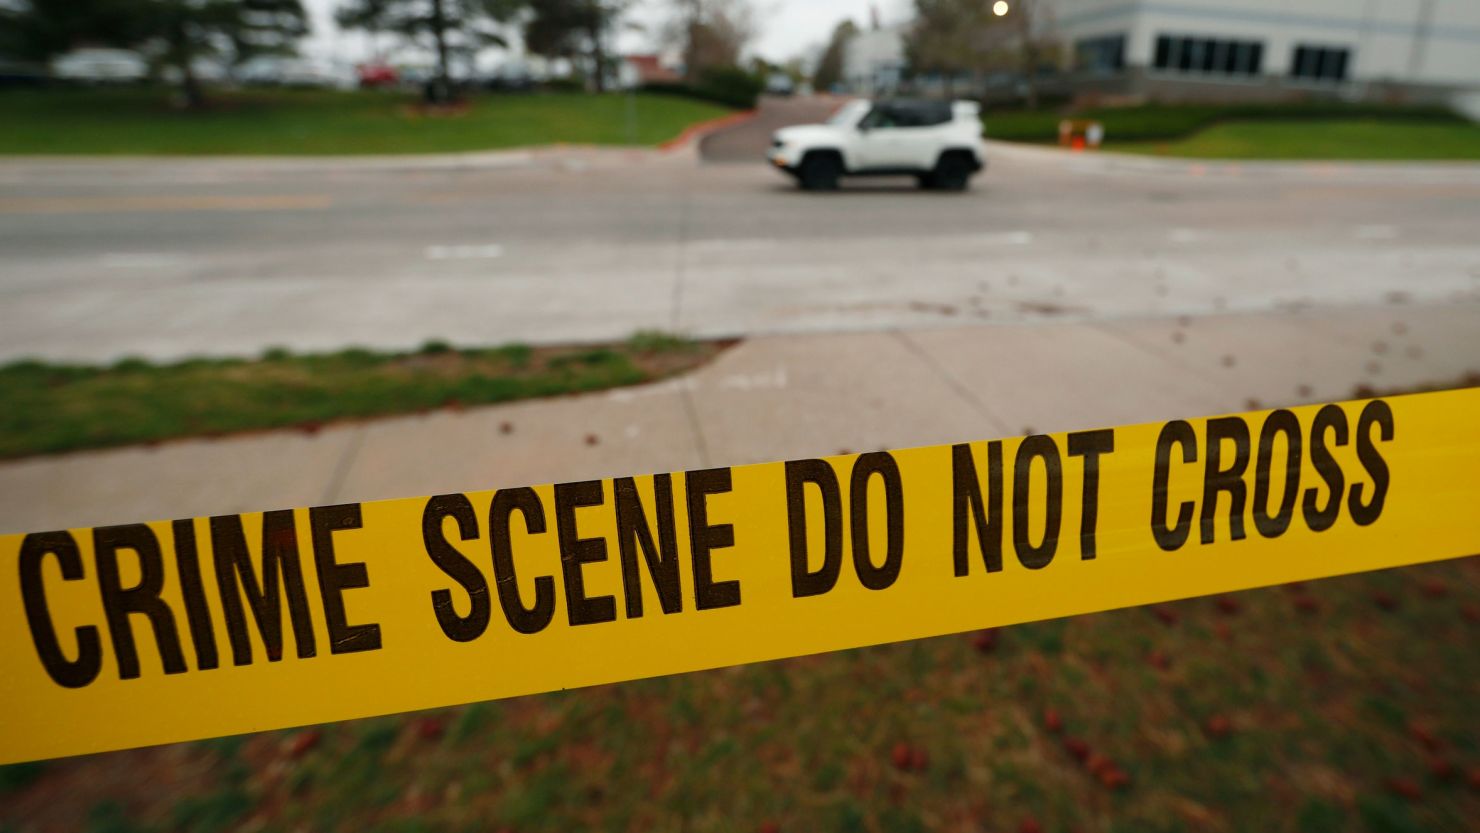 Police tape remains near the scene following Tuesday's shooting at STEM Highlands Ranch school, Wednesday, May 8, 2019, in Highlands Ranch, Colo. (AP Photo/David Zalubowski)